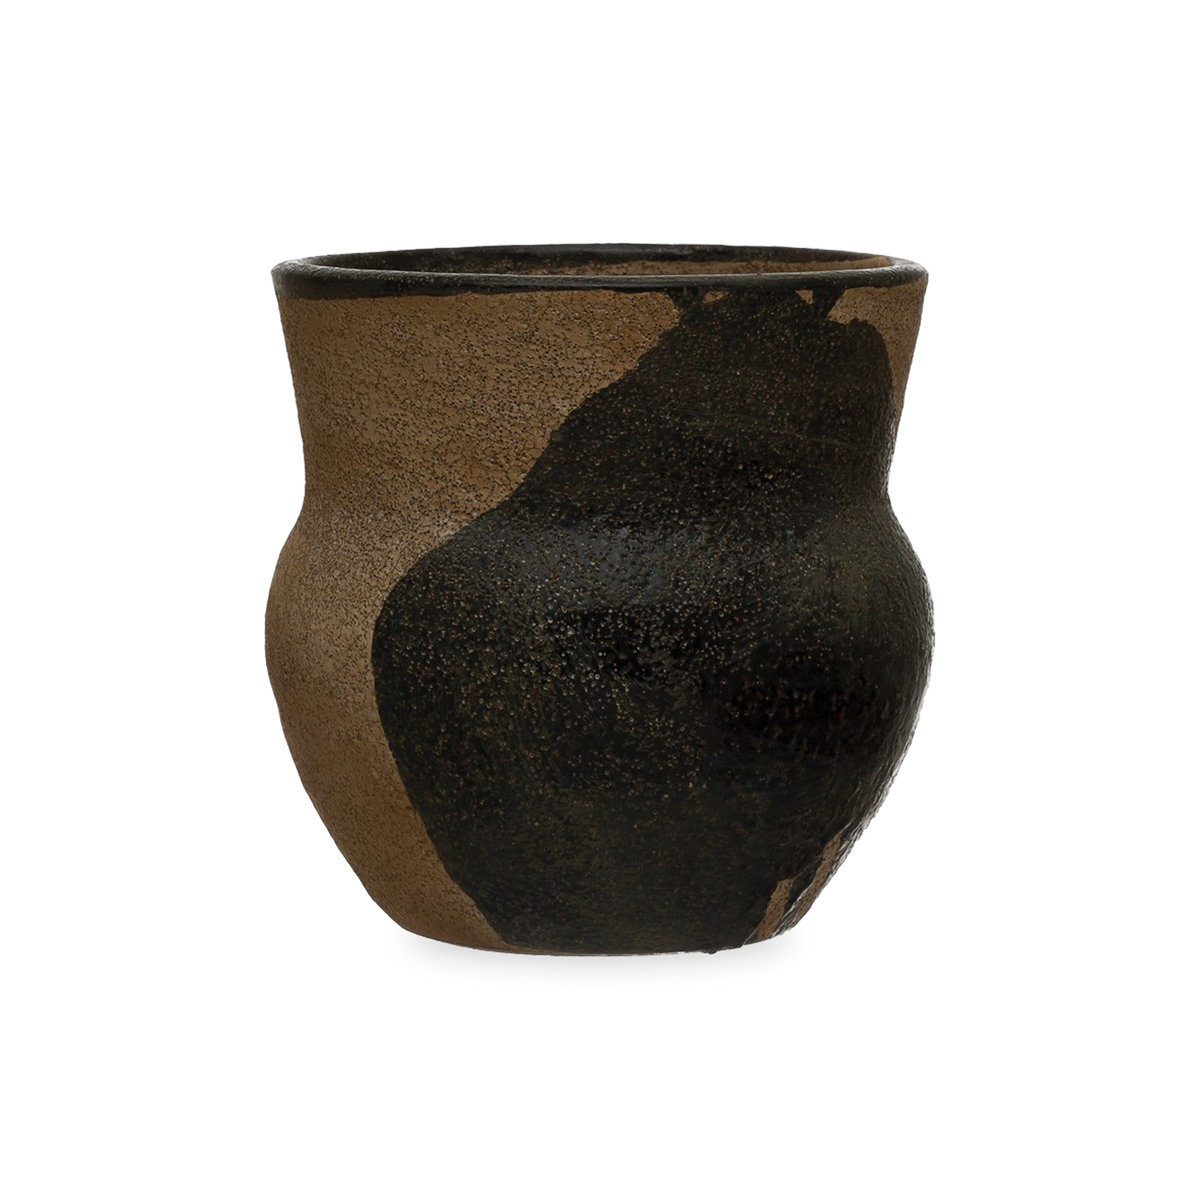 This Terracotta Planter features rough-to-touch terracotta material that is accentuated by a neutral palette of tan and black.